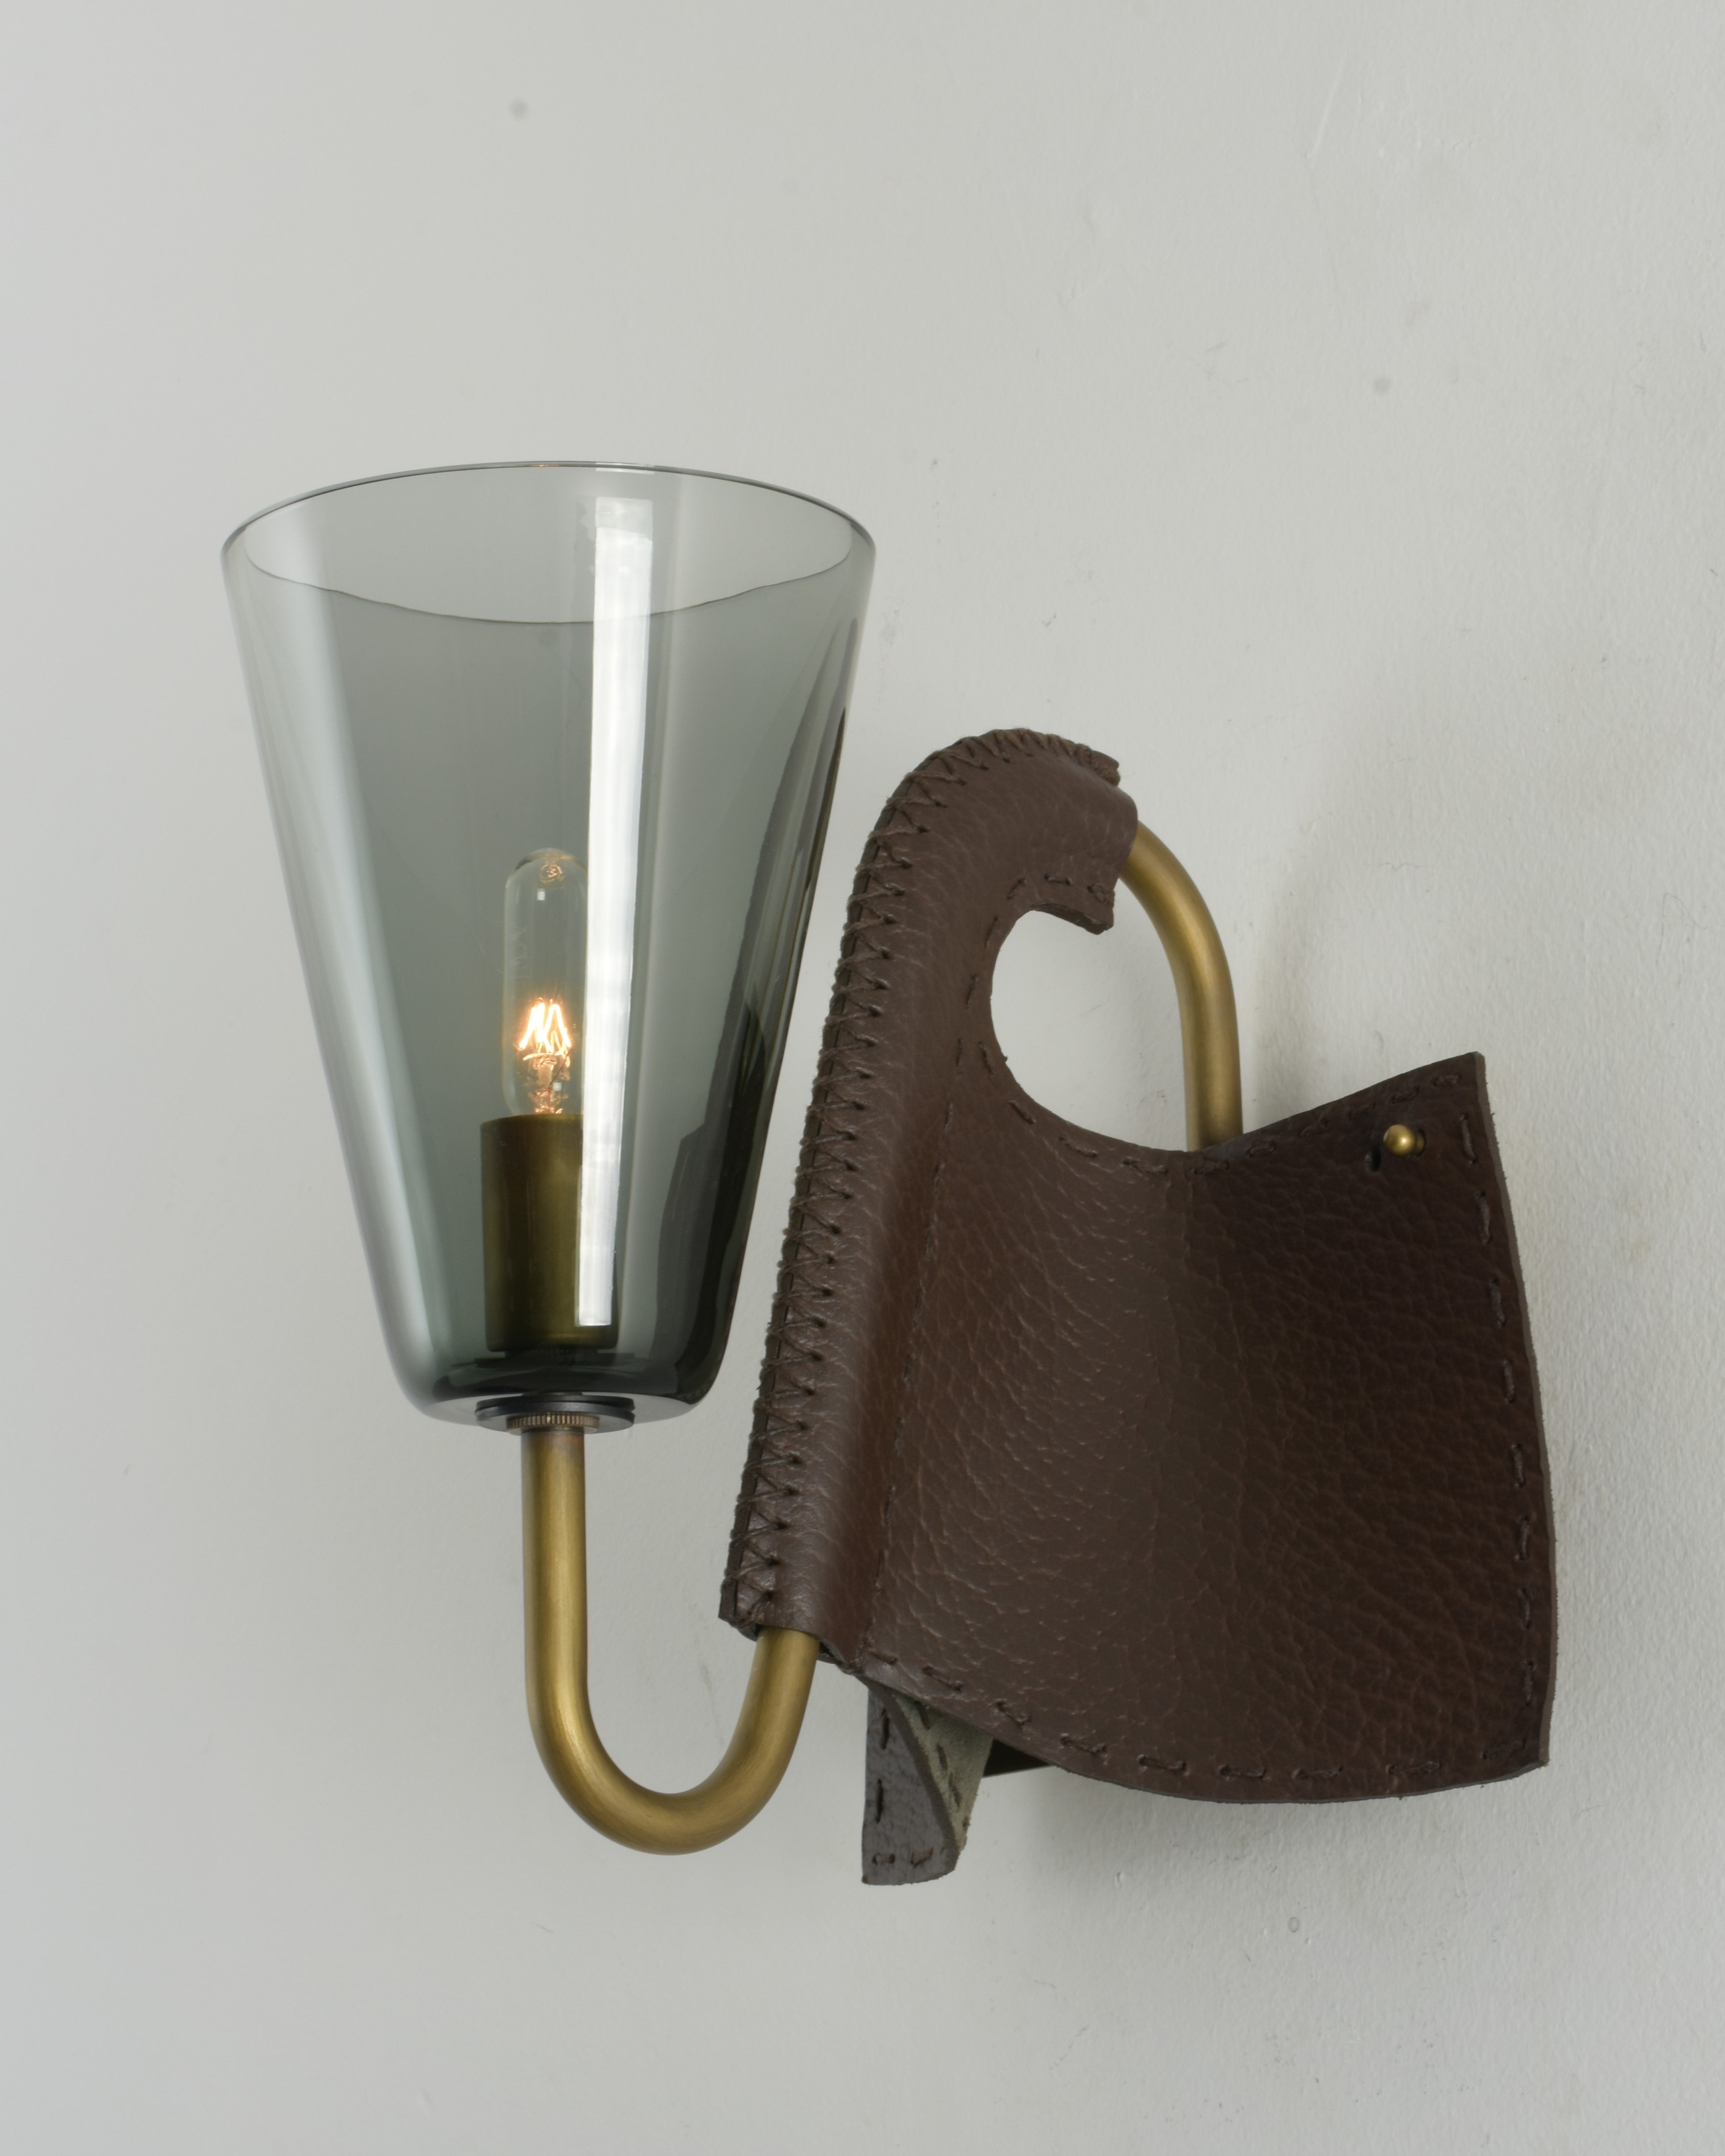 In Stock sconce not pictured.  Image for reference only.